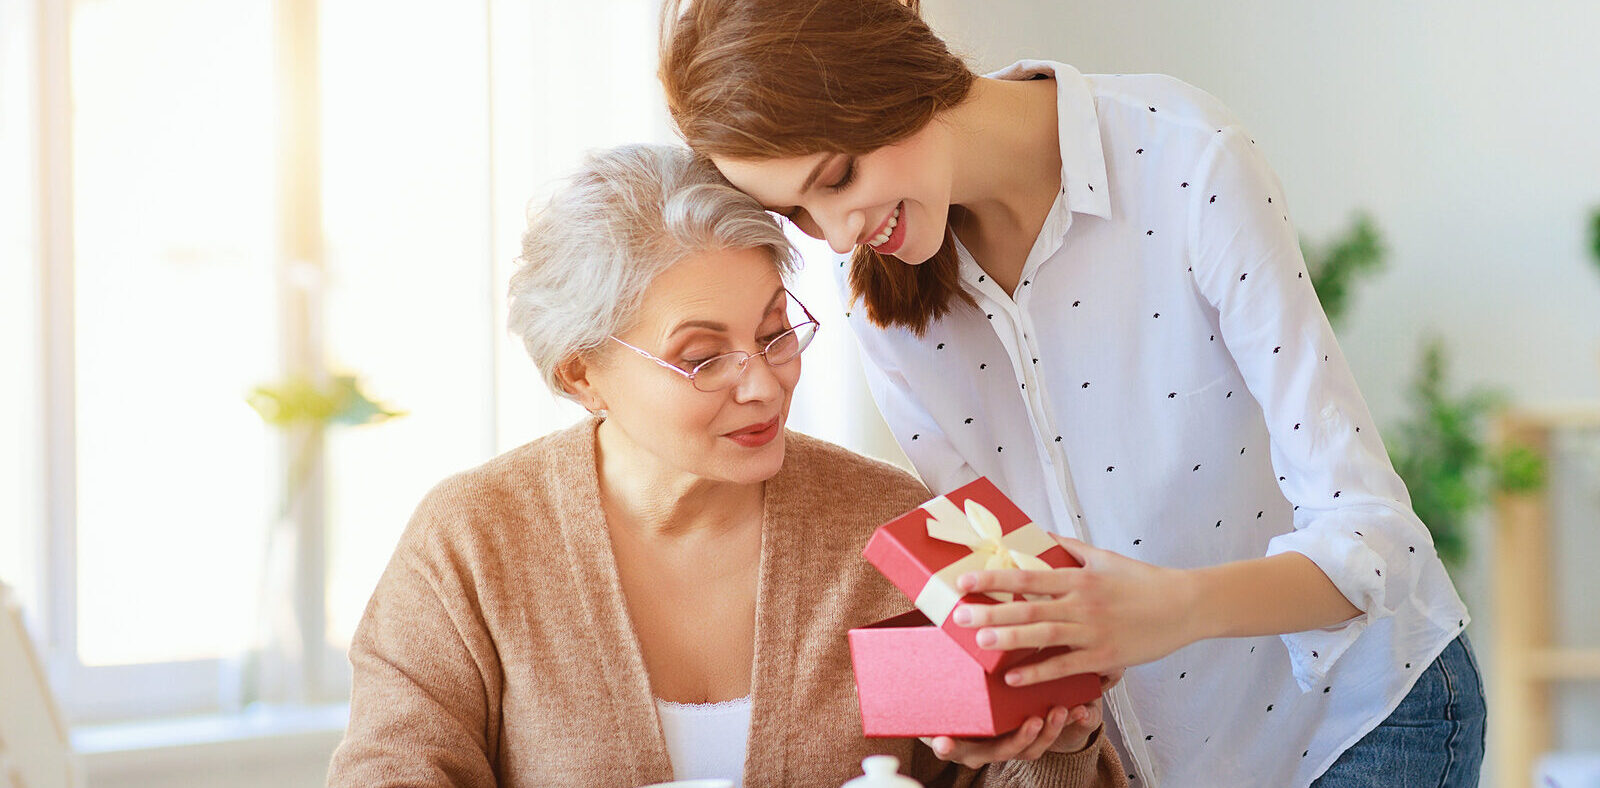 adult daughter gifting a present to her elderly mother